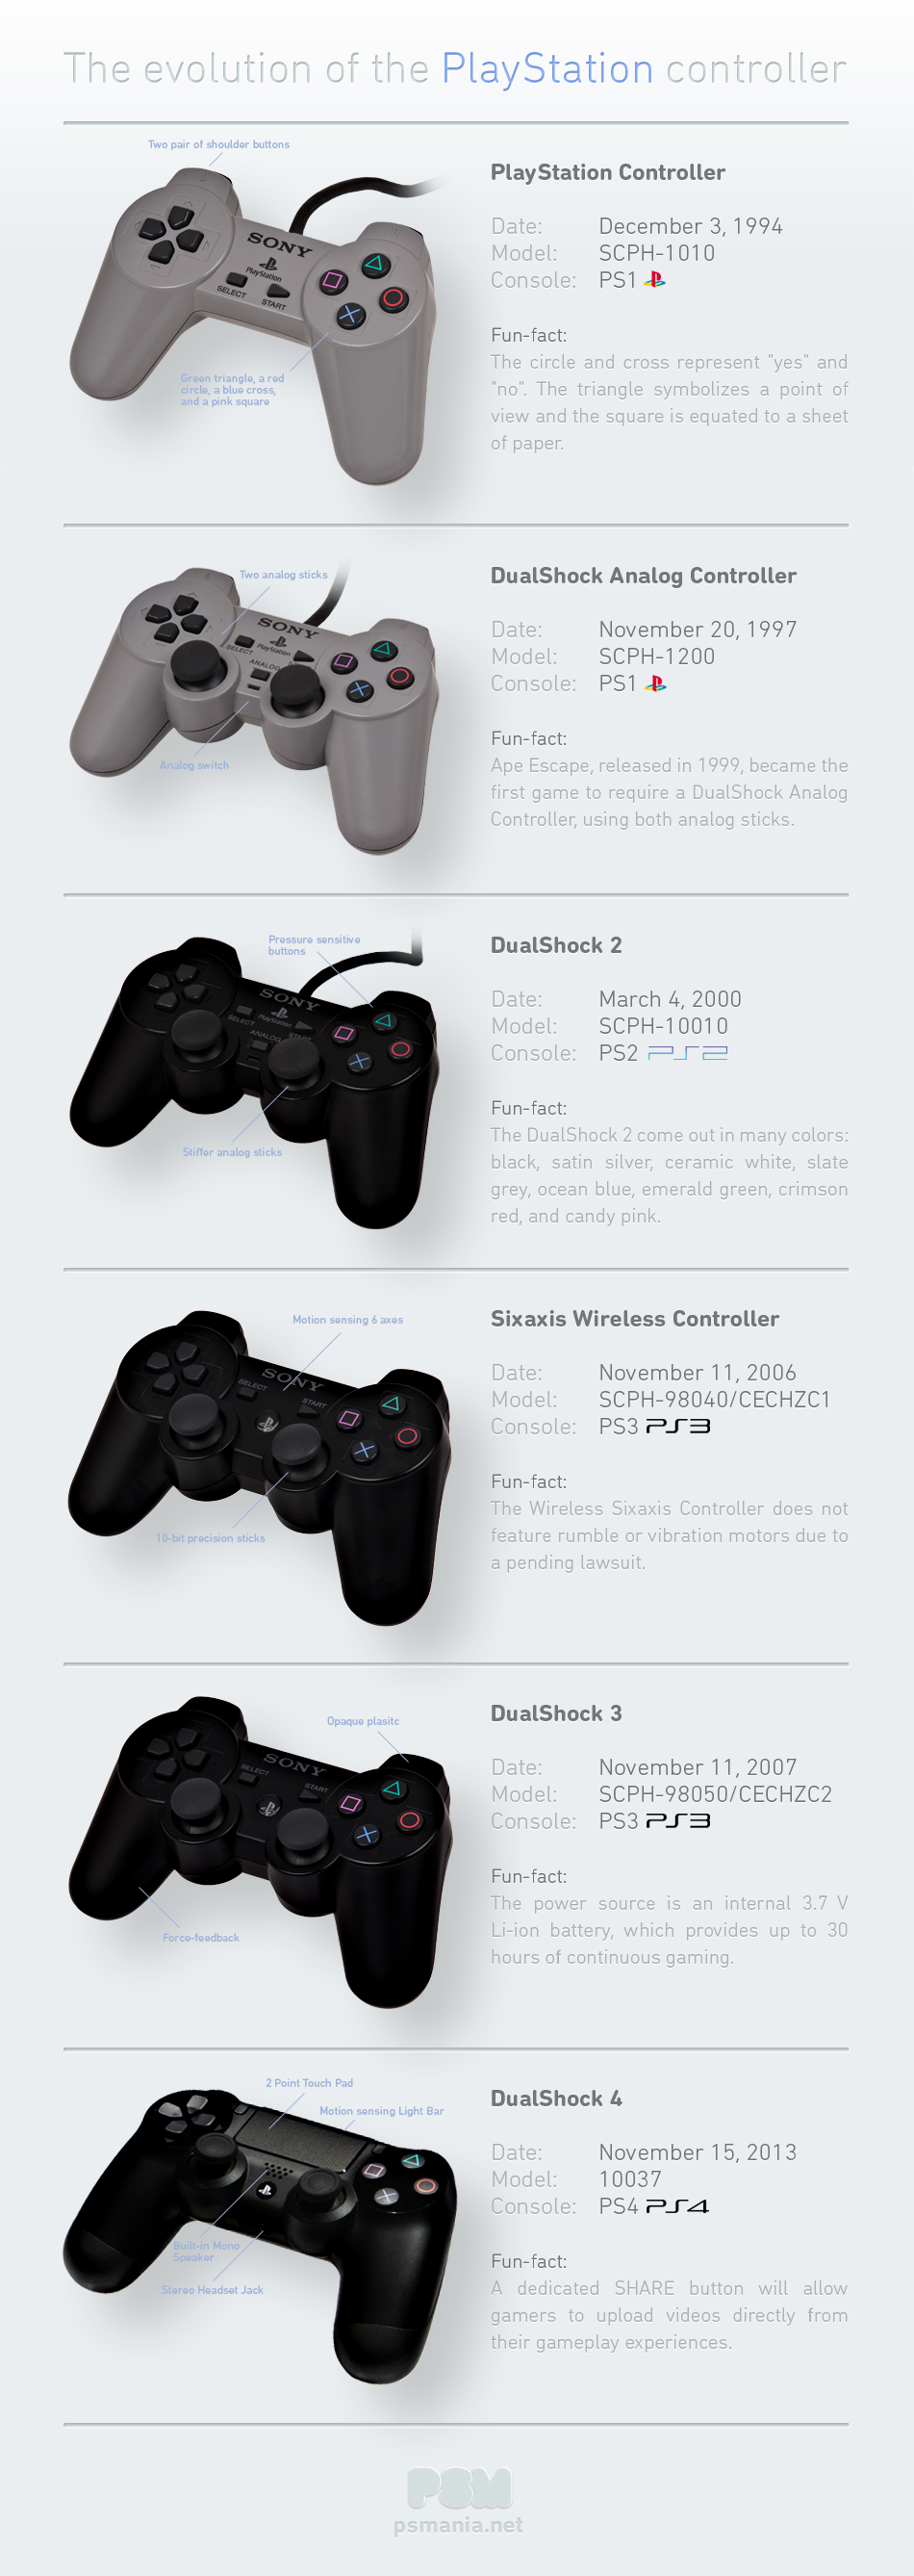 The of the PlayStation Controller | Visual.ly